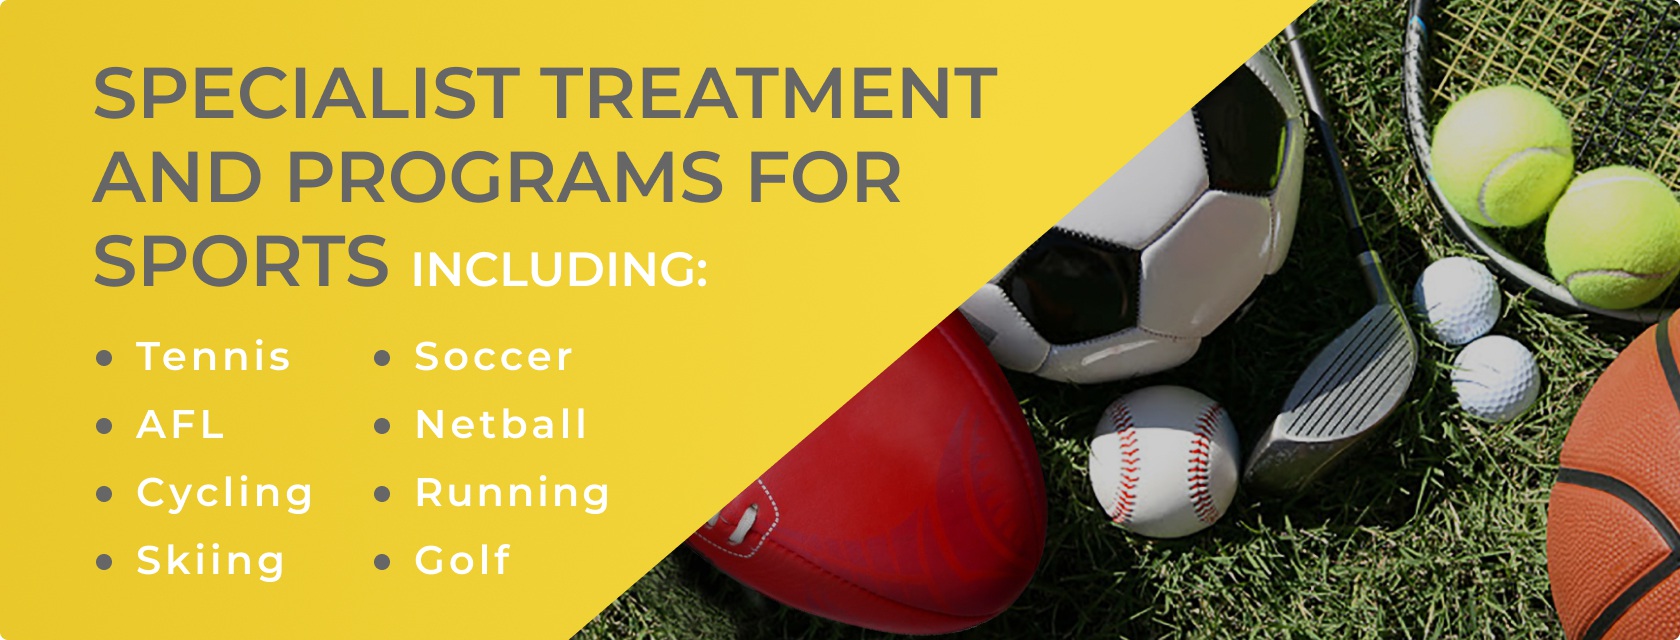 Specialist treatment and programs for sports. including, Tennis, Soccer, AFL, Netball, Cycling, Running, Skiing and Golf